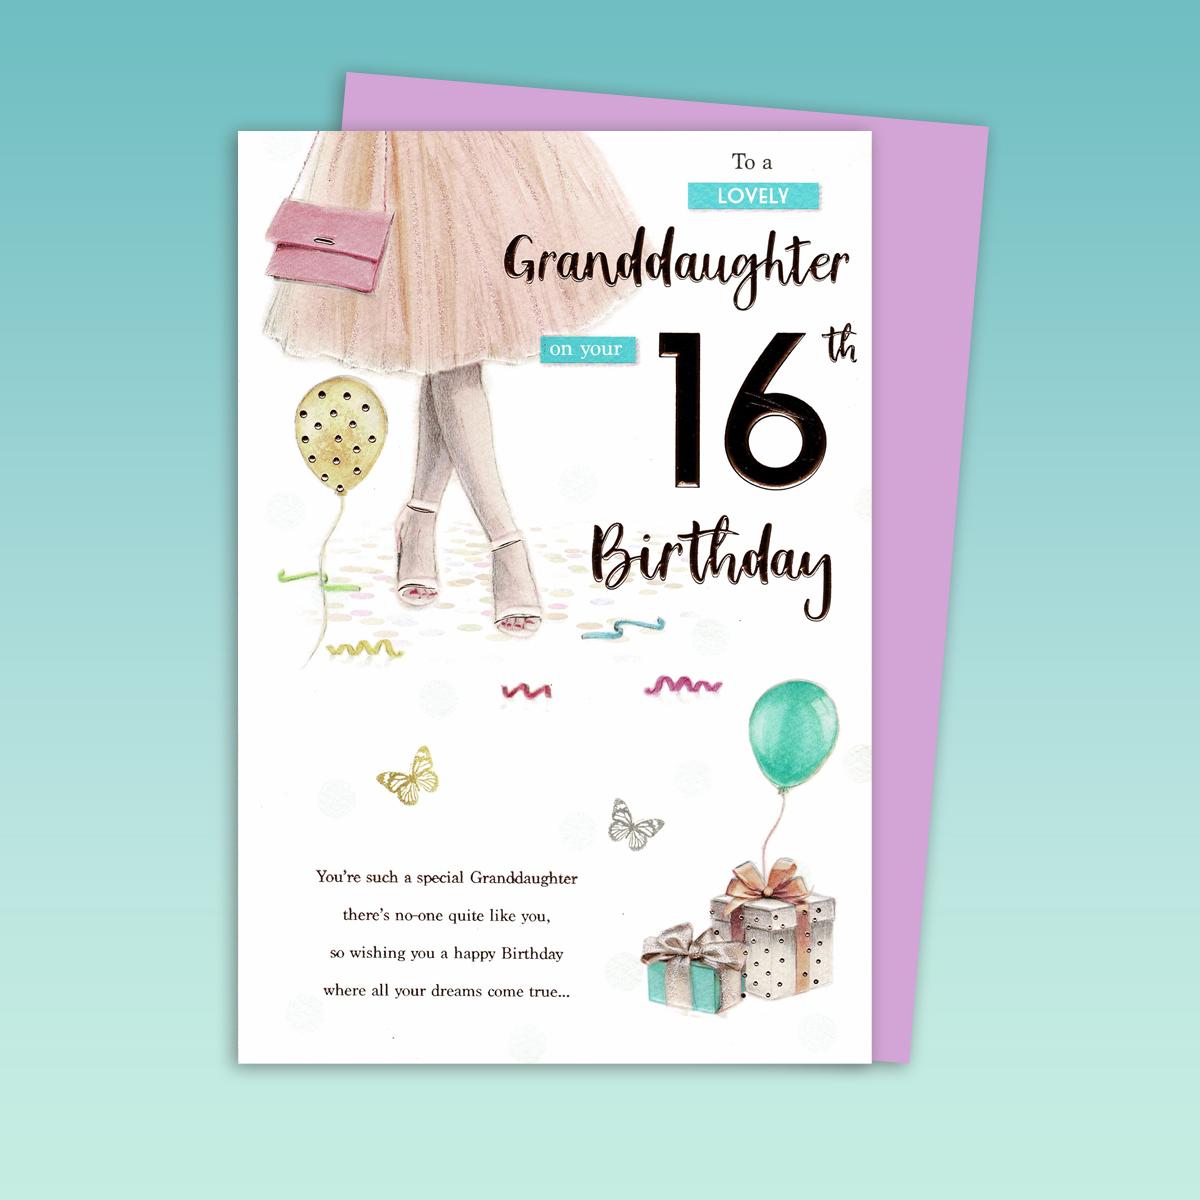 Granddaughter Age 16 Birthday Card Front Image